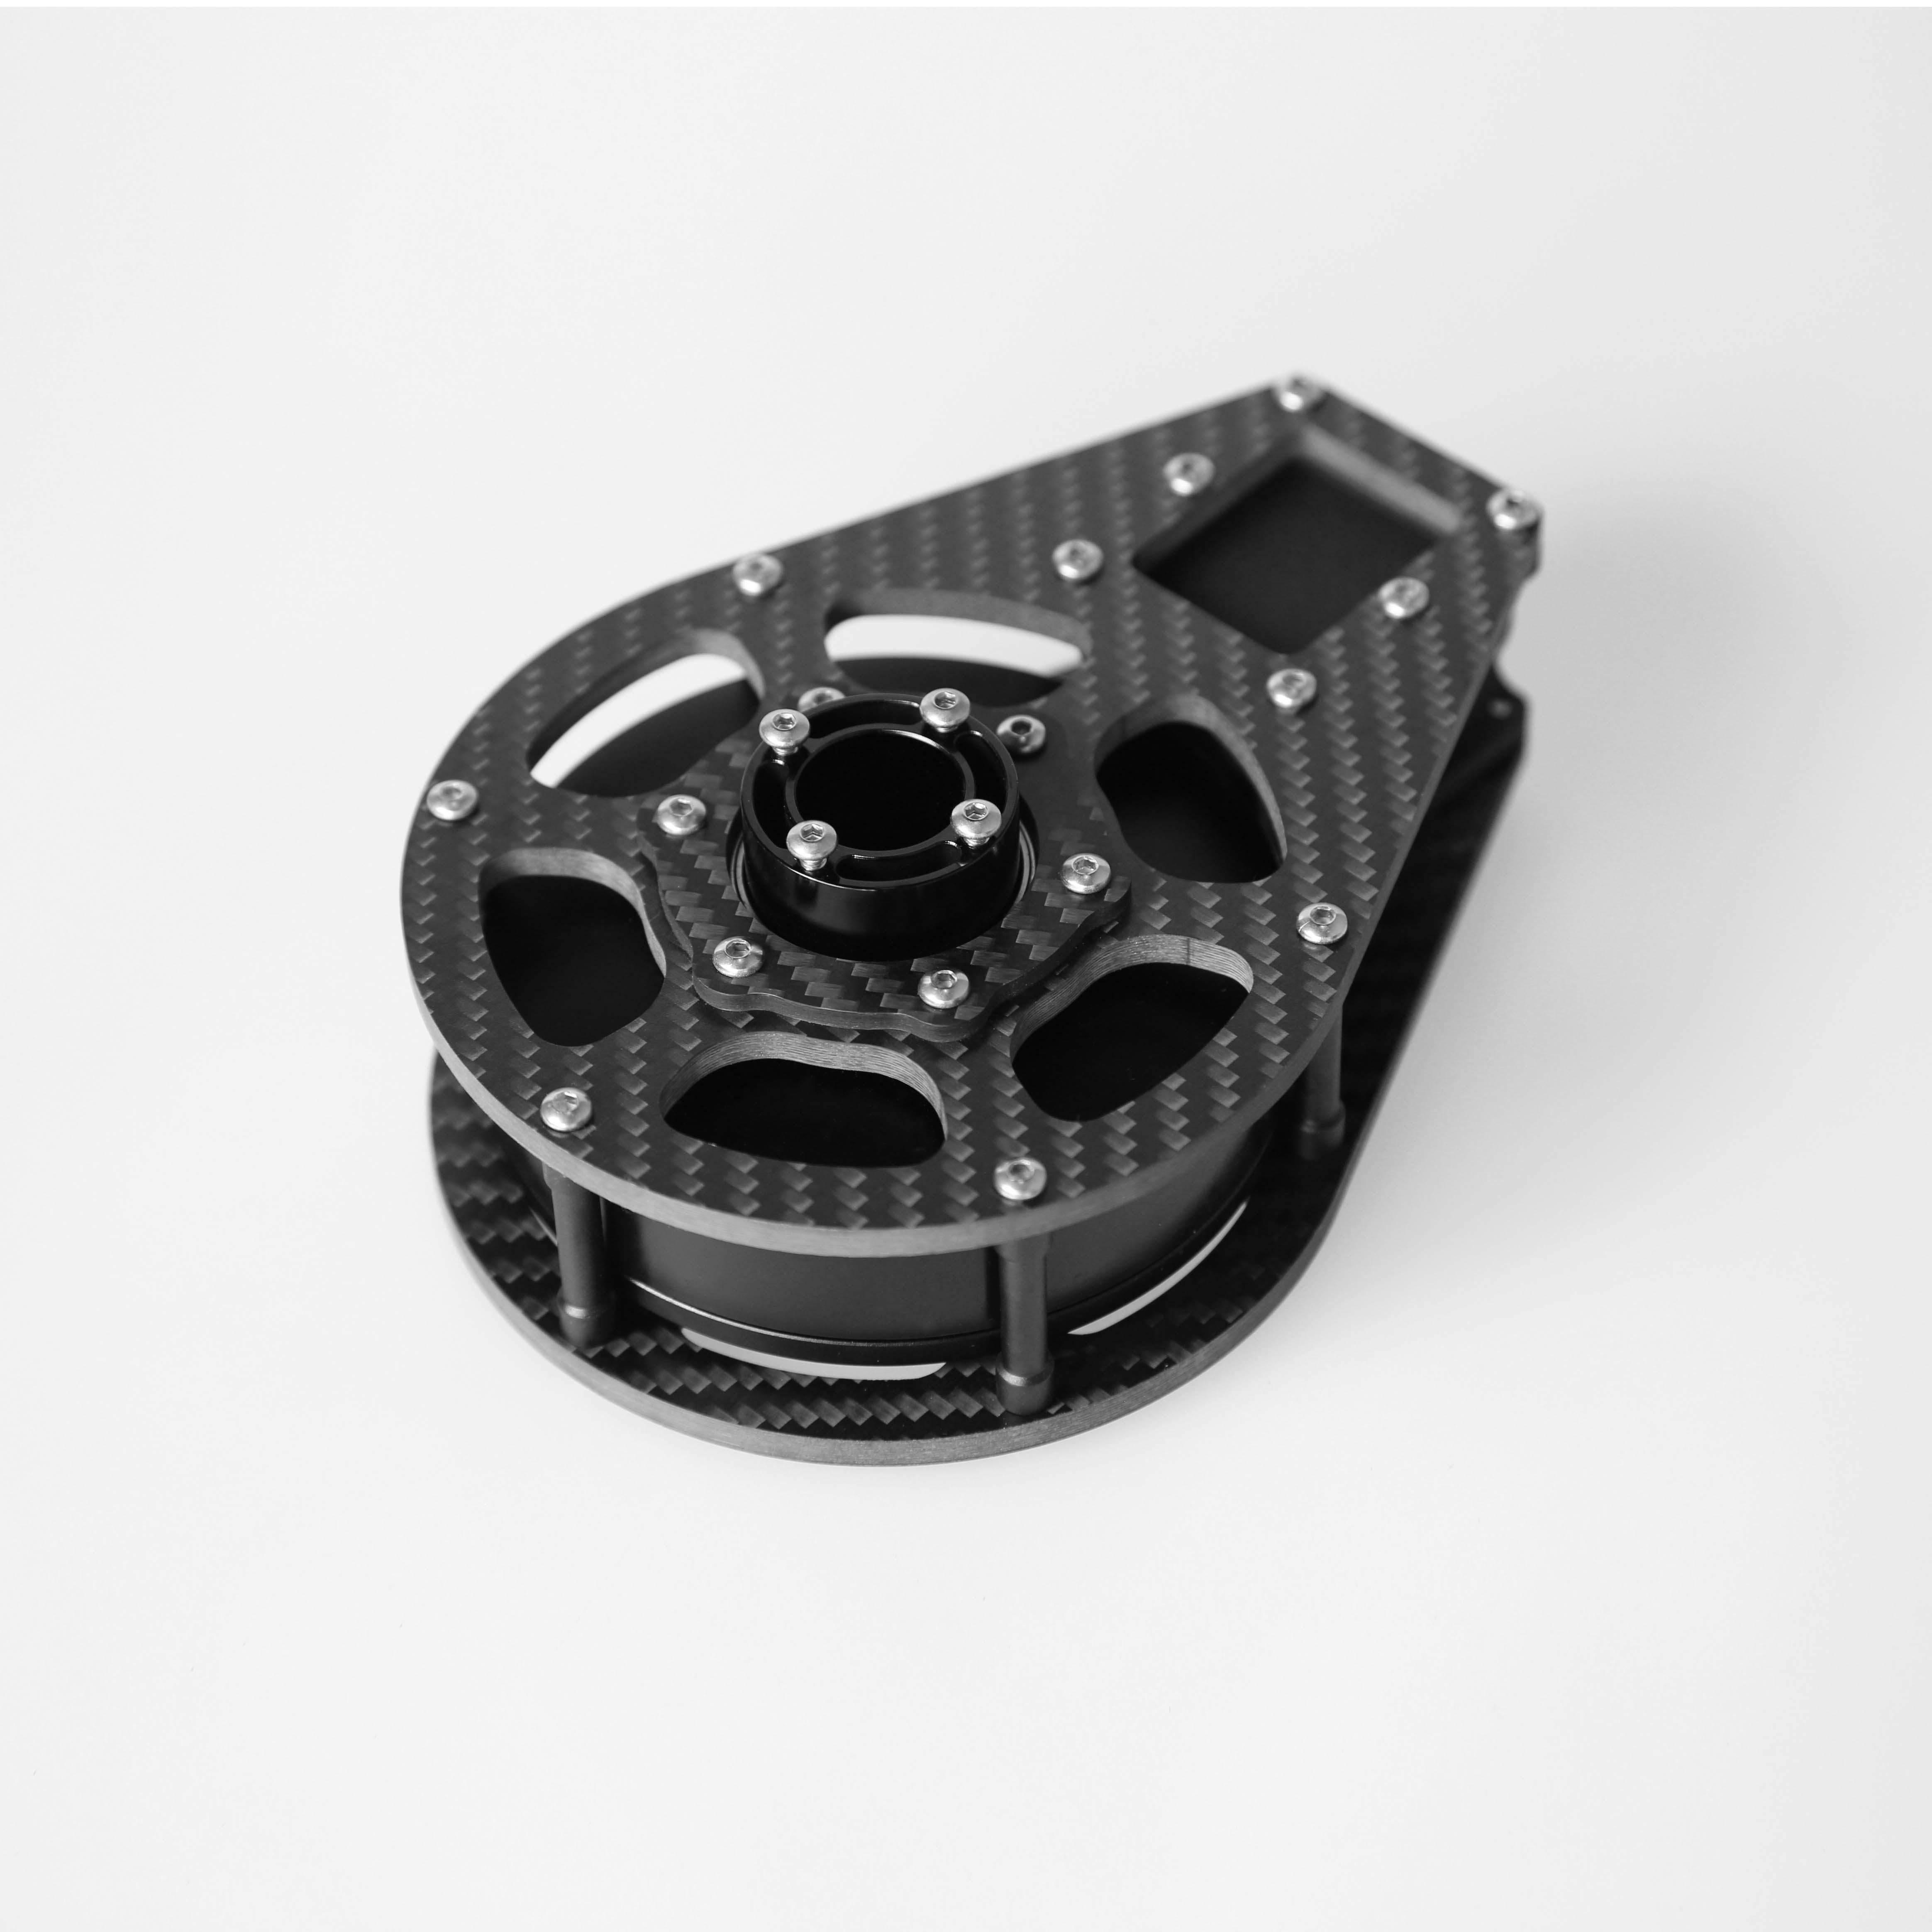 Carbon fiber motor cage 3 Axis Tilt X Axis with 6208 motor